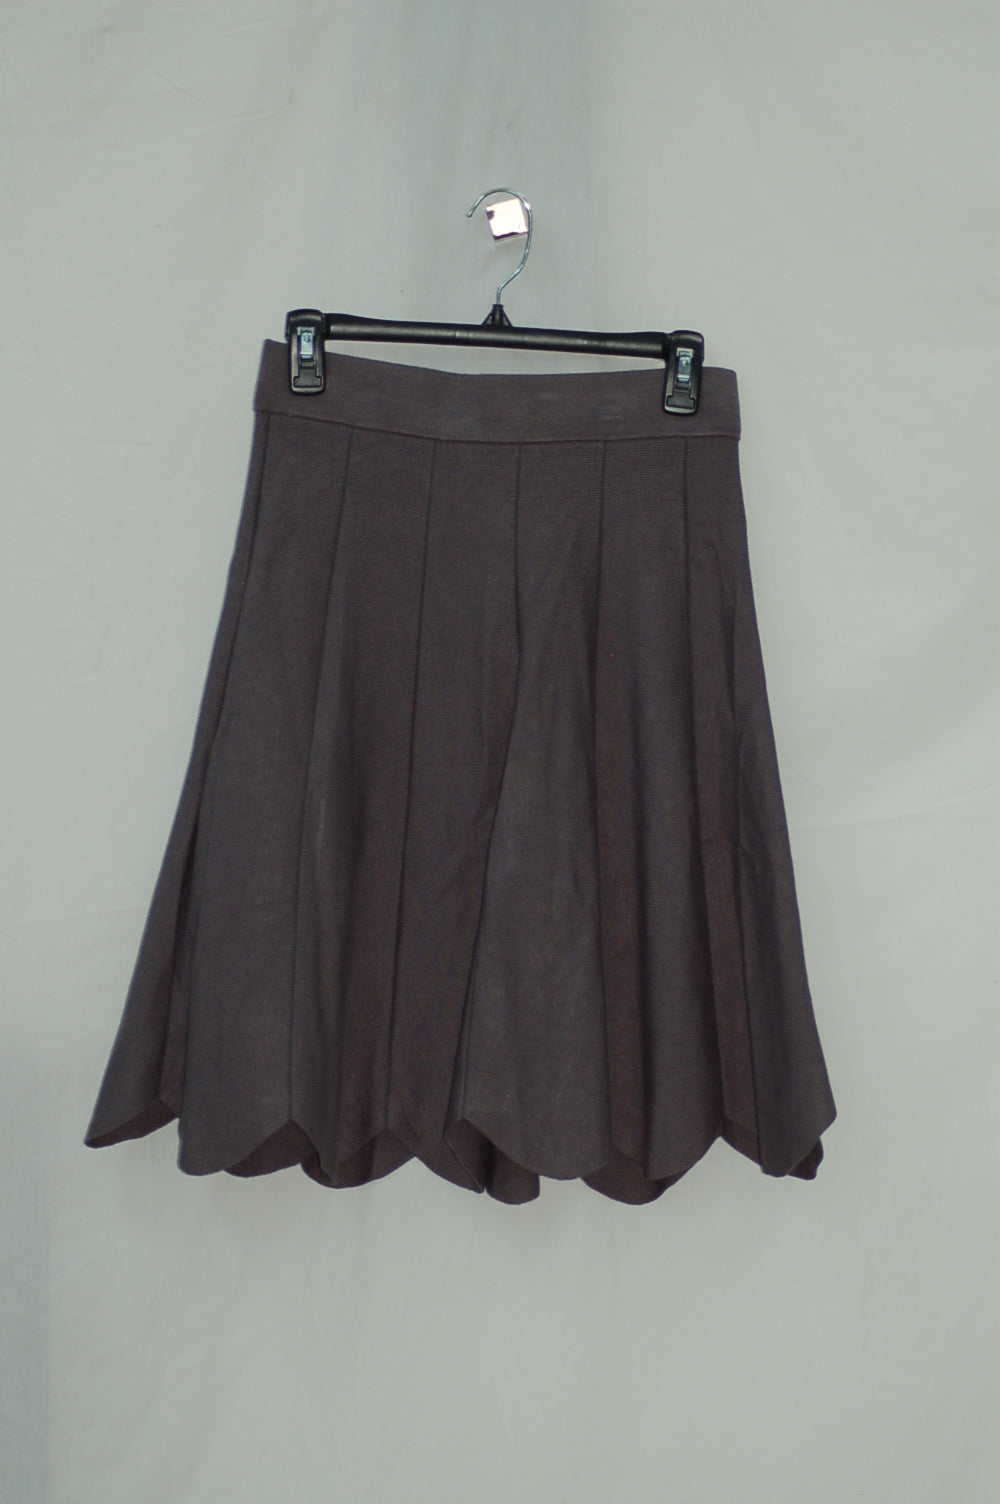 Olivia Grace Scalloped Pull-On Skirt Quiet Shade XS